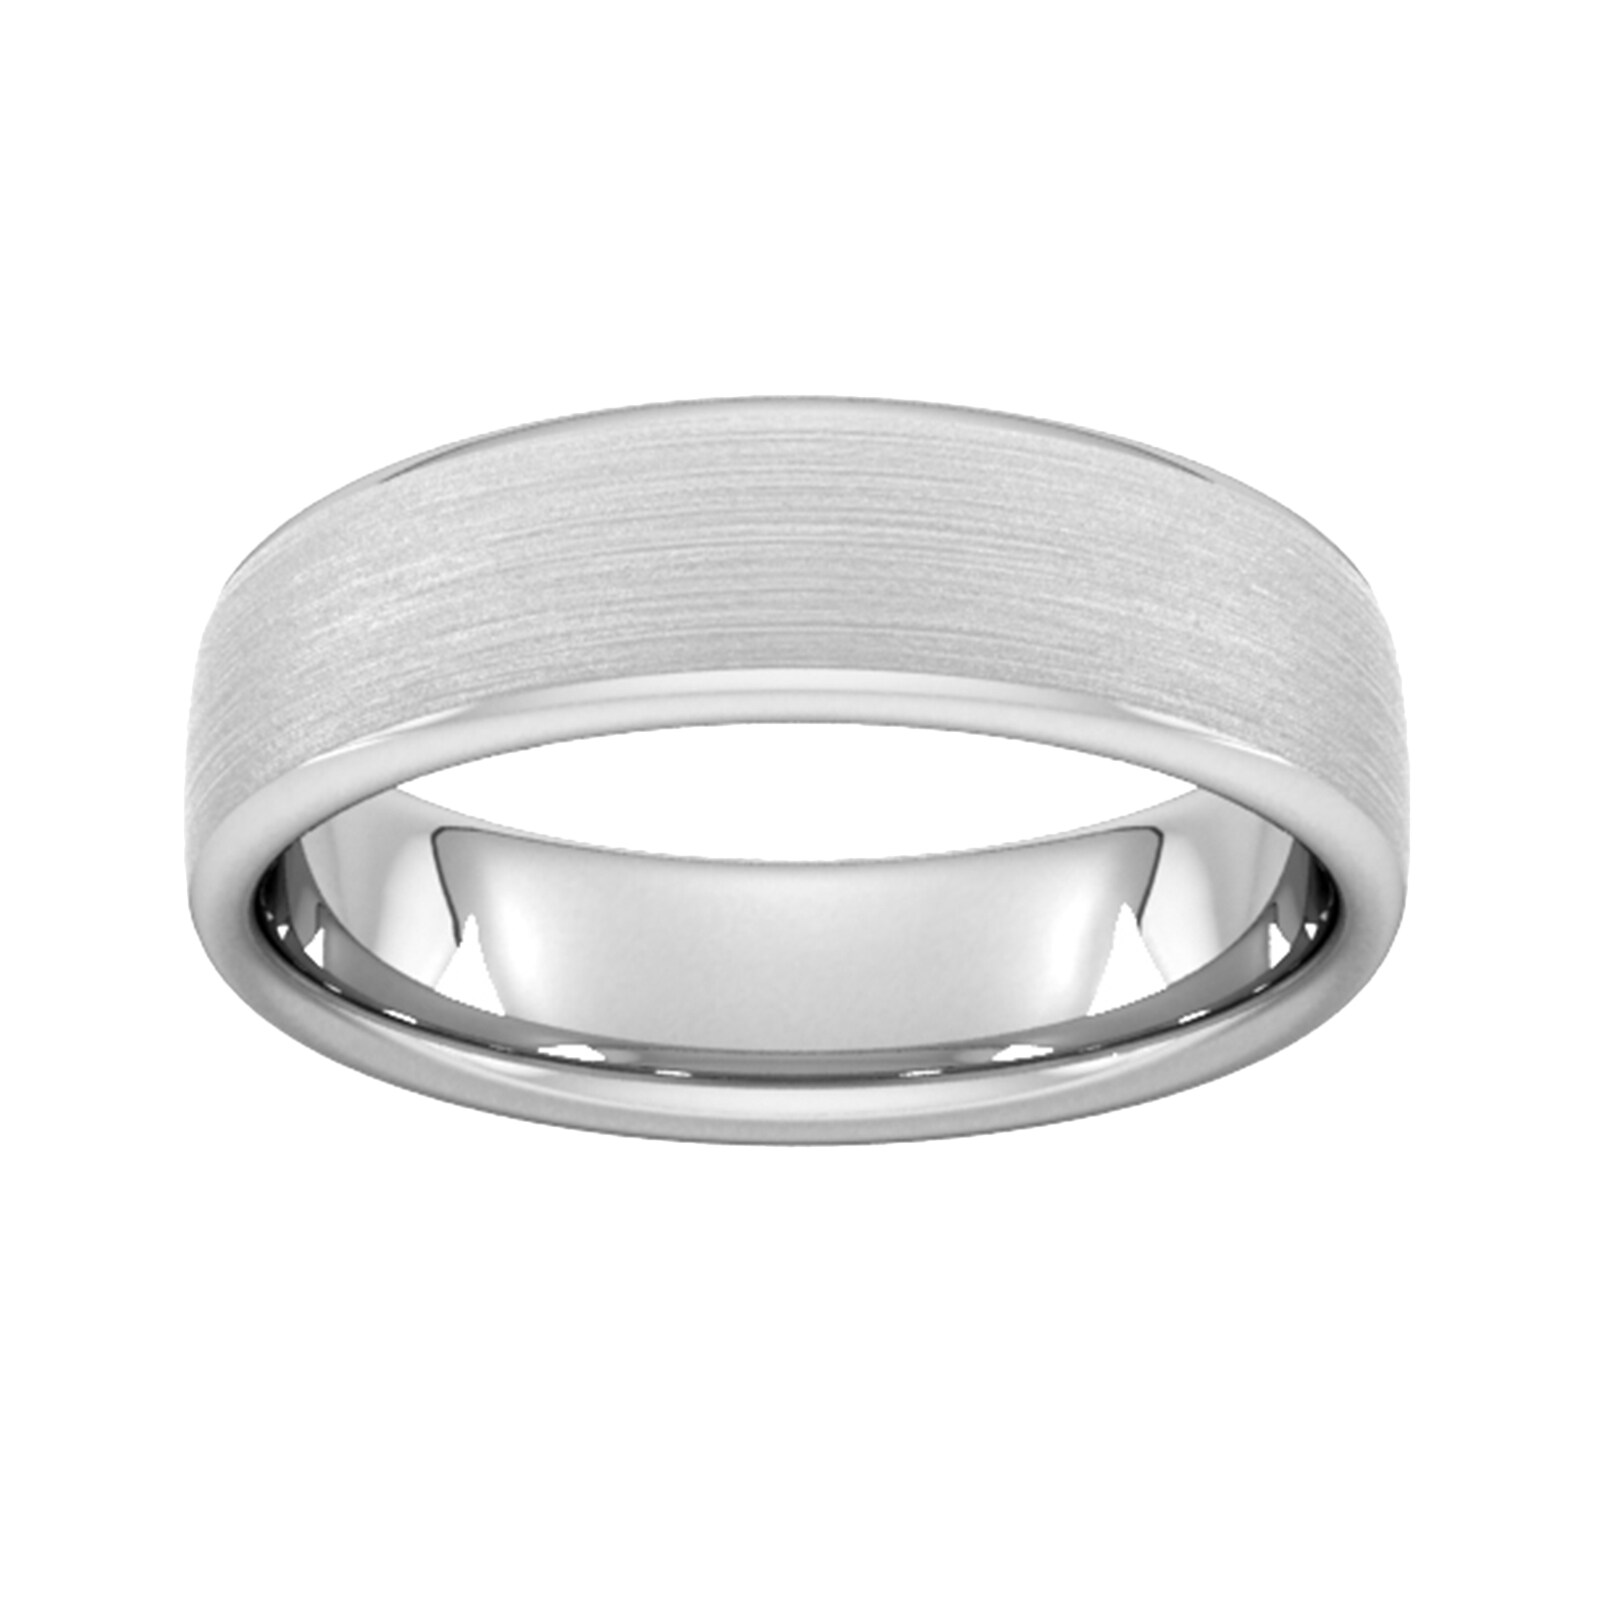 6mm Traditional Court Heavy Matt Finished Wedding Ring In 9 Carat White Gold - Ring Size G